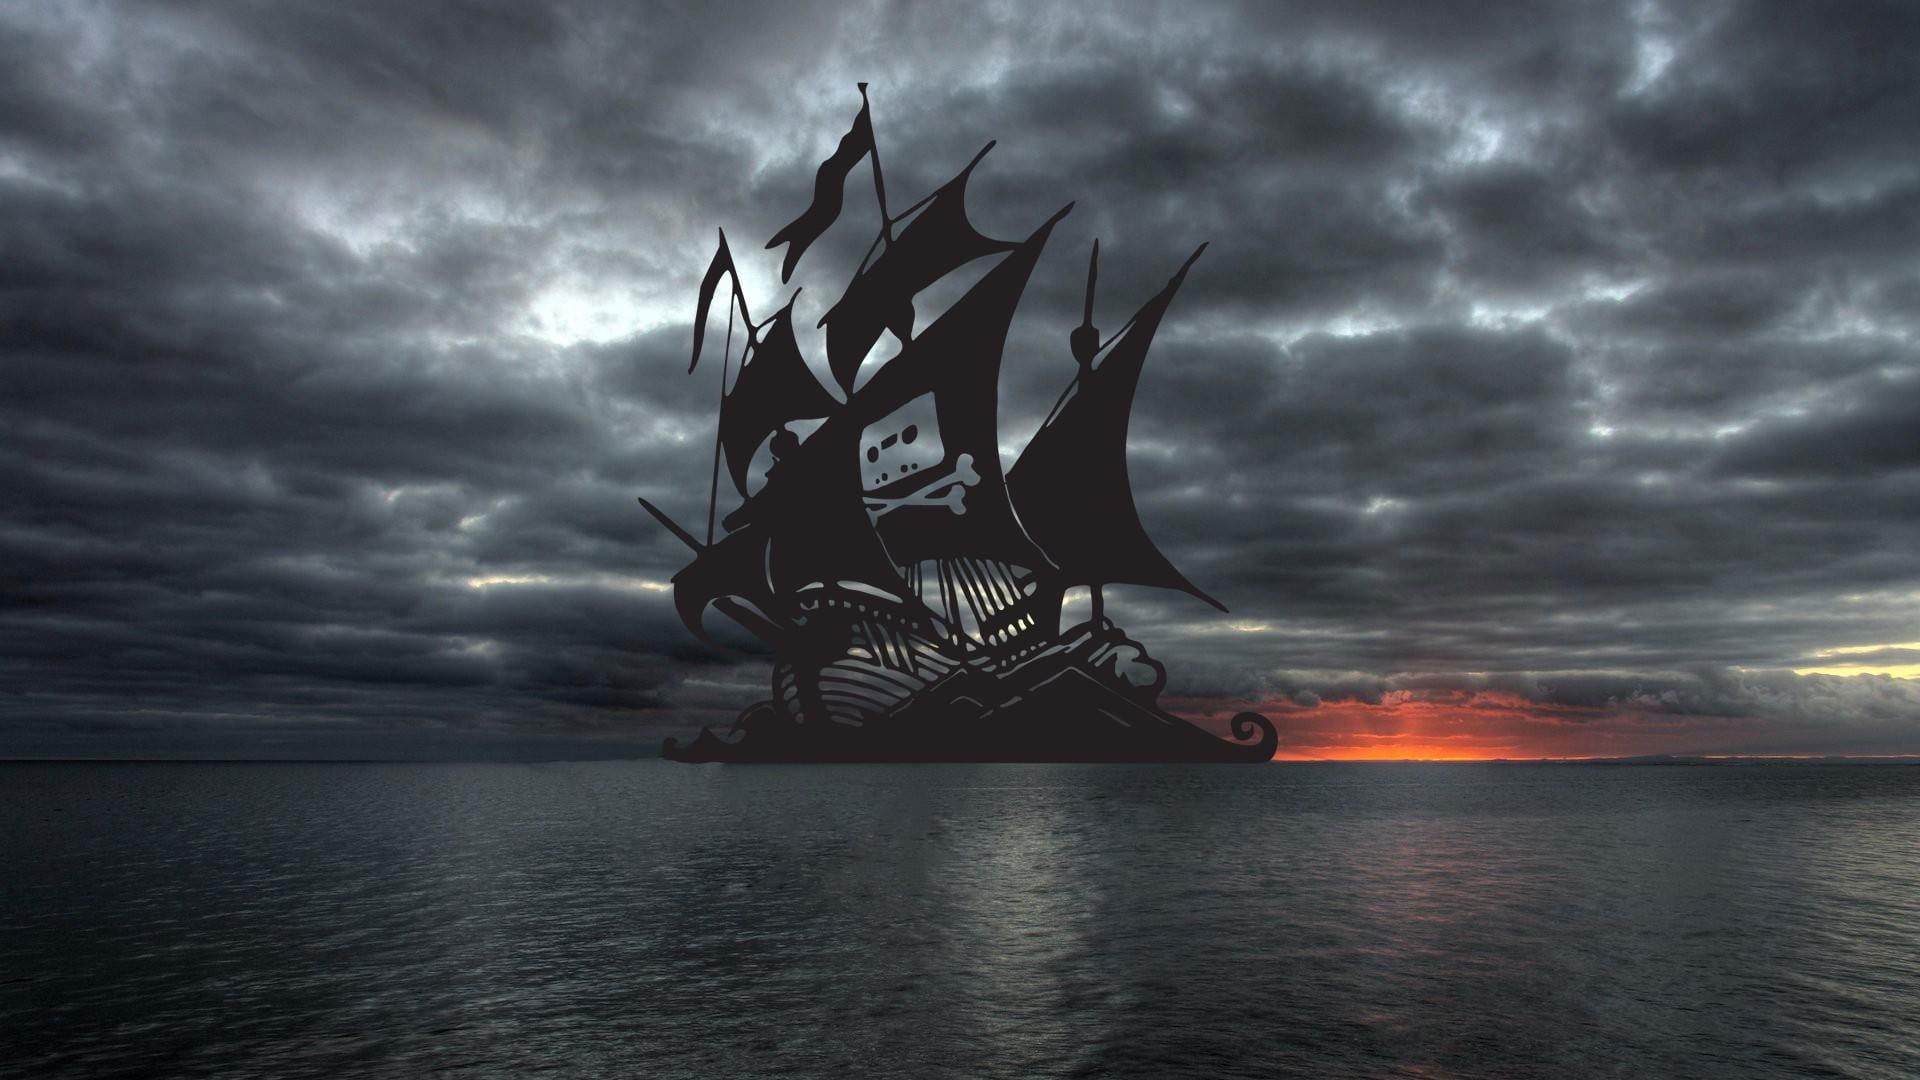 The Pirate Bay logo on a ship at sea - Pirate